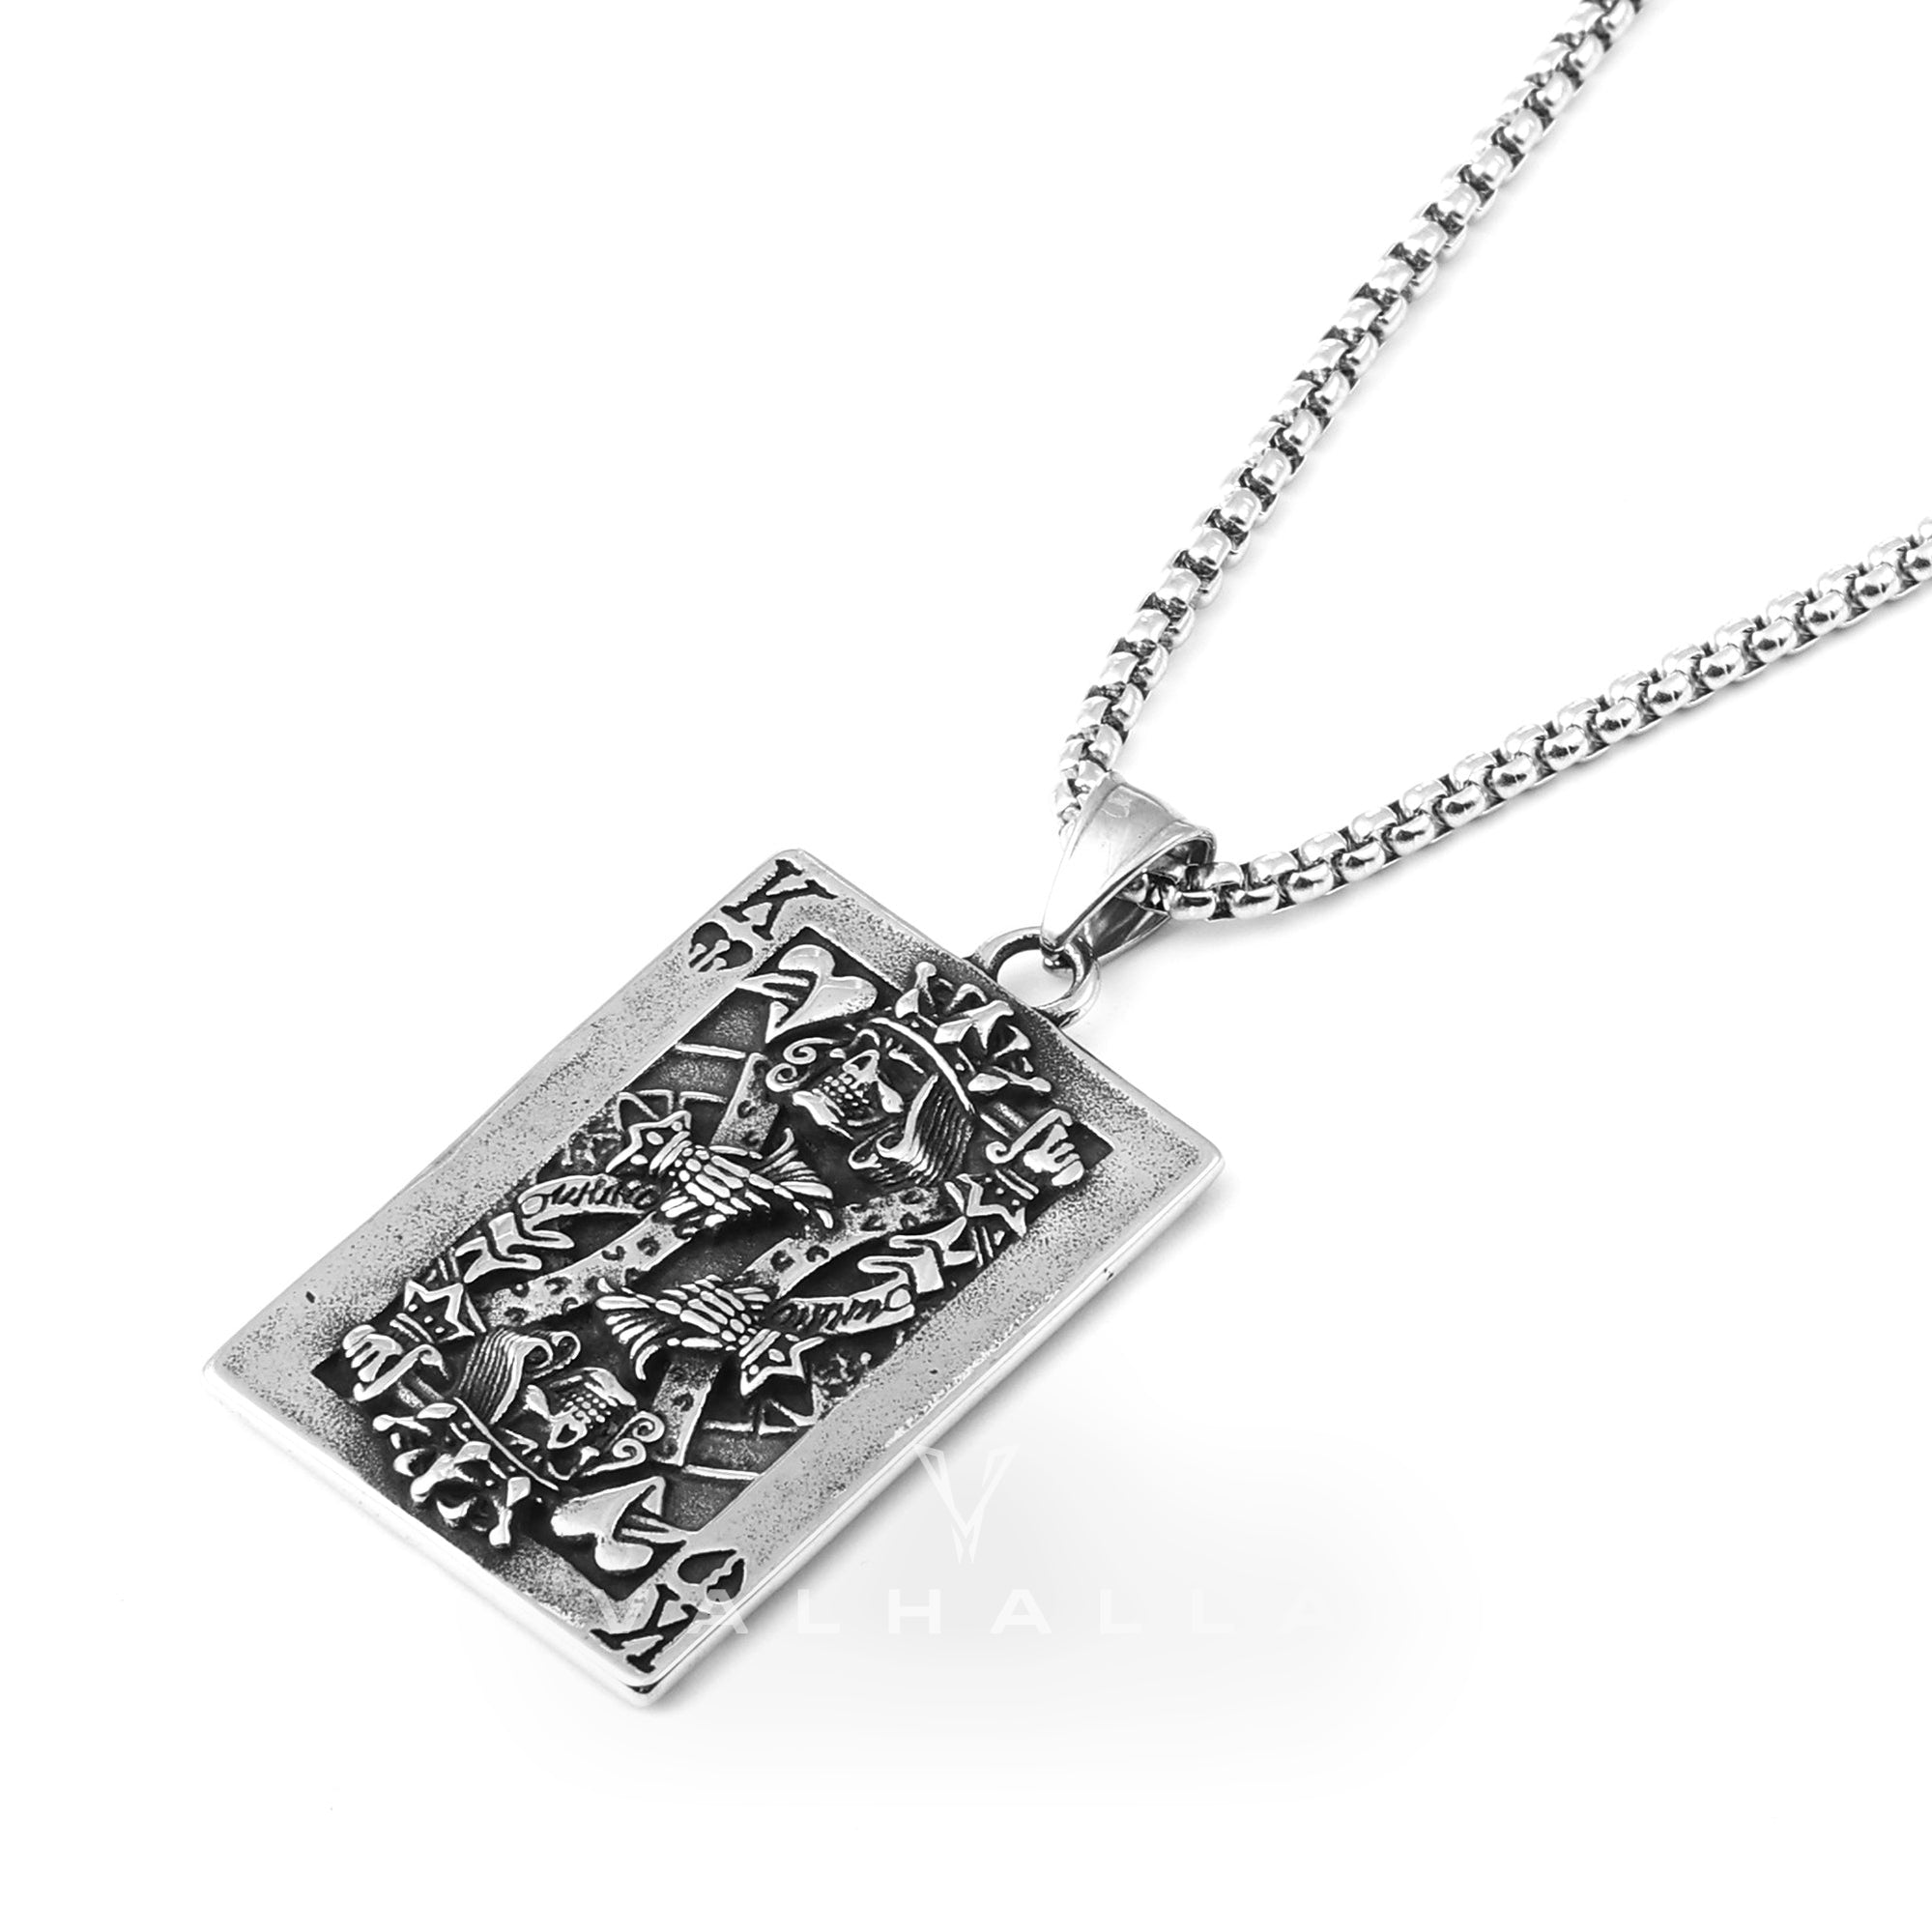 King Of Spades Stainless Steel Poker Pendant & Chain